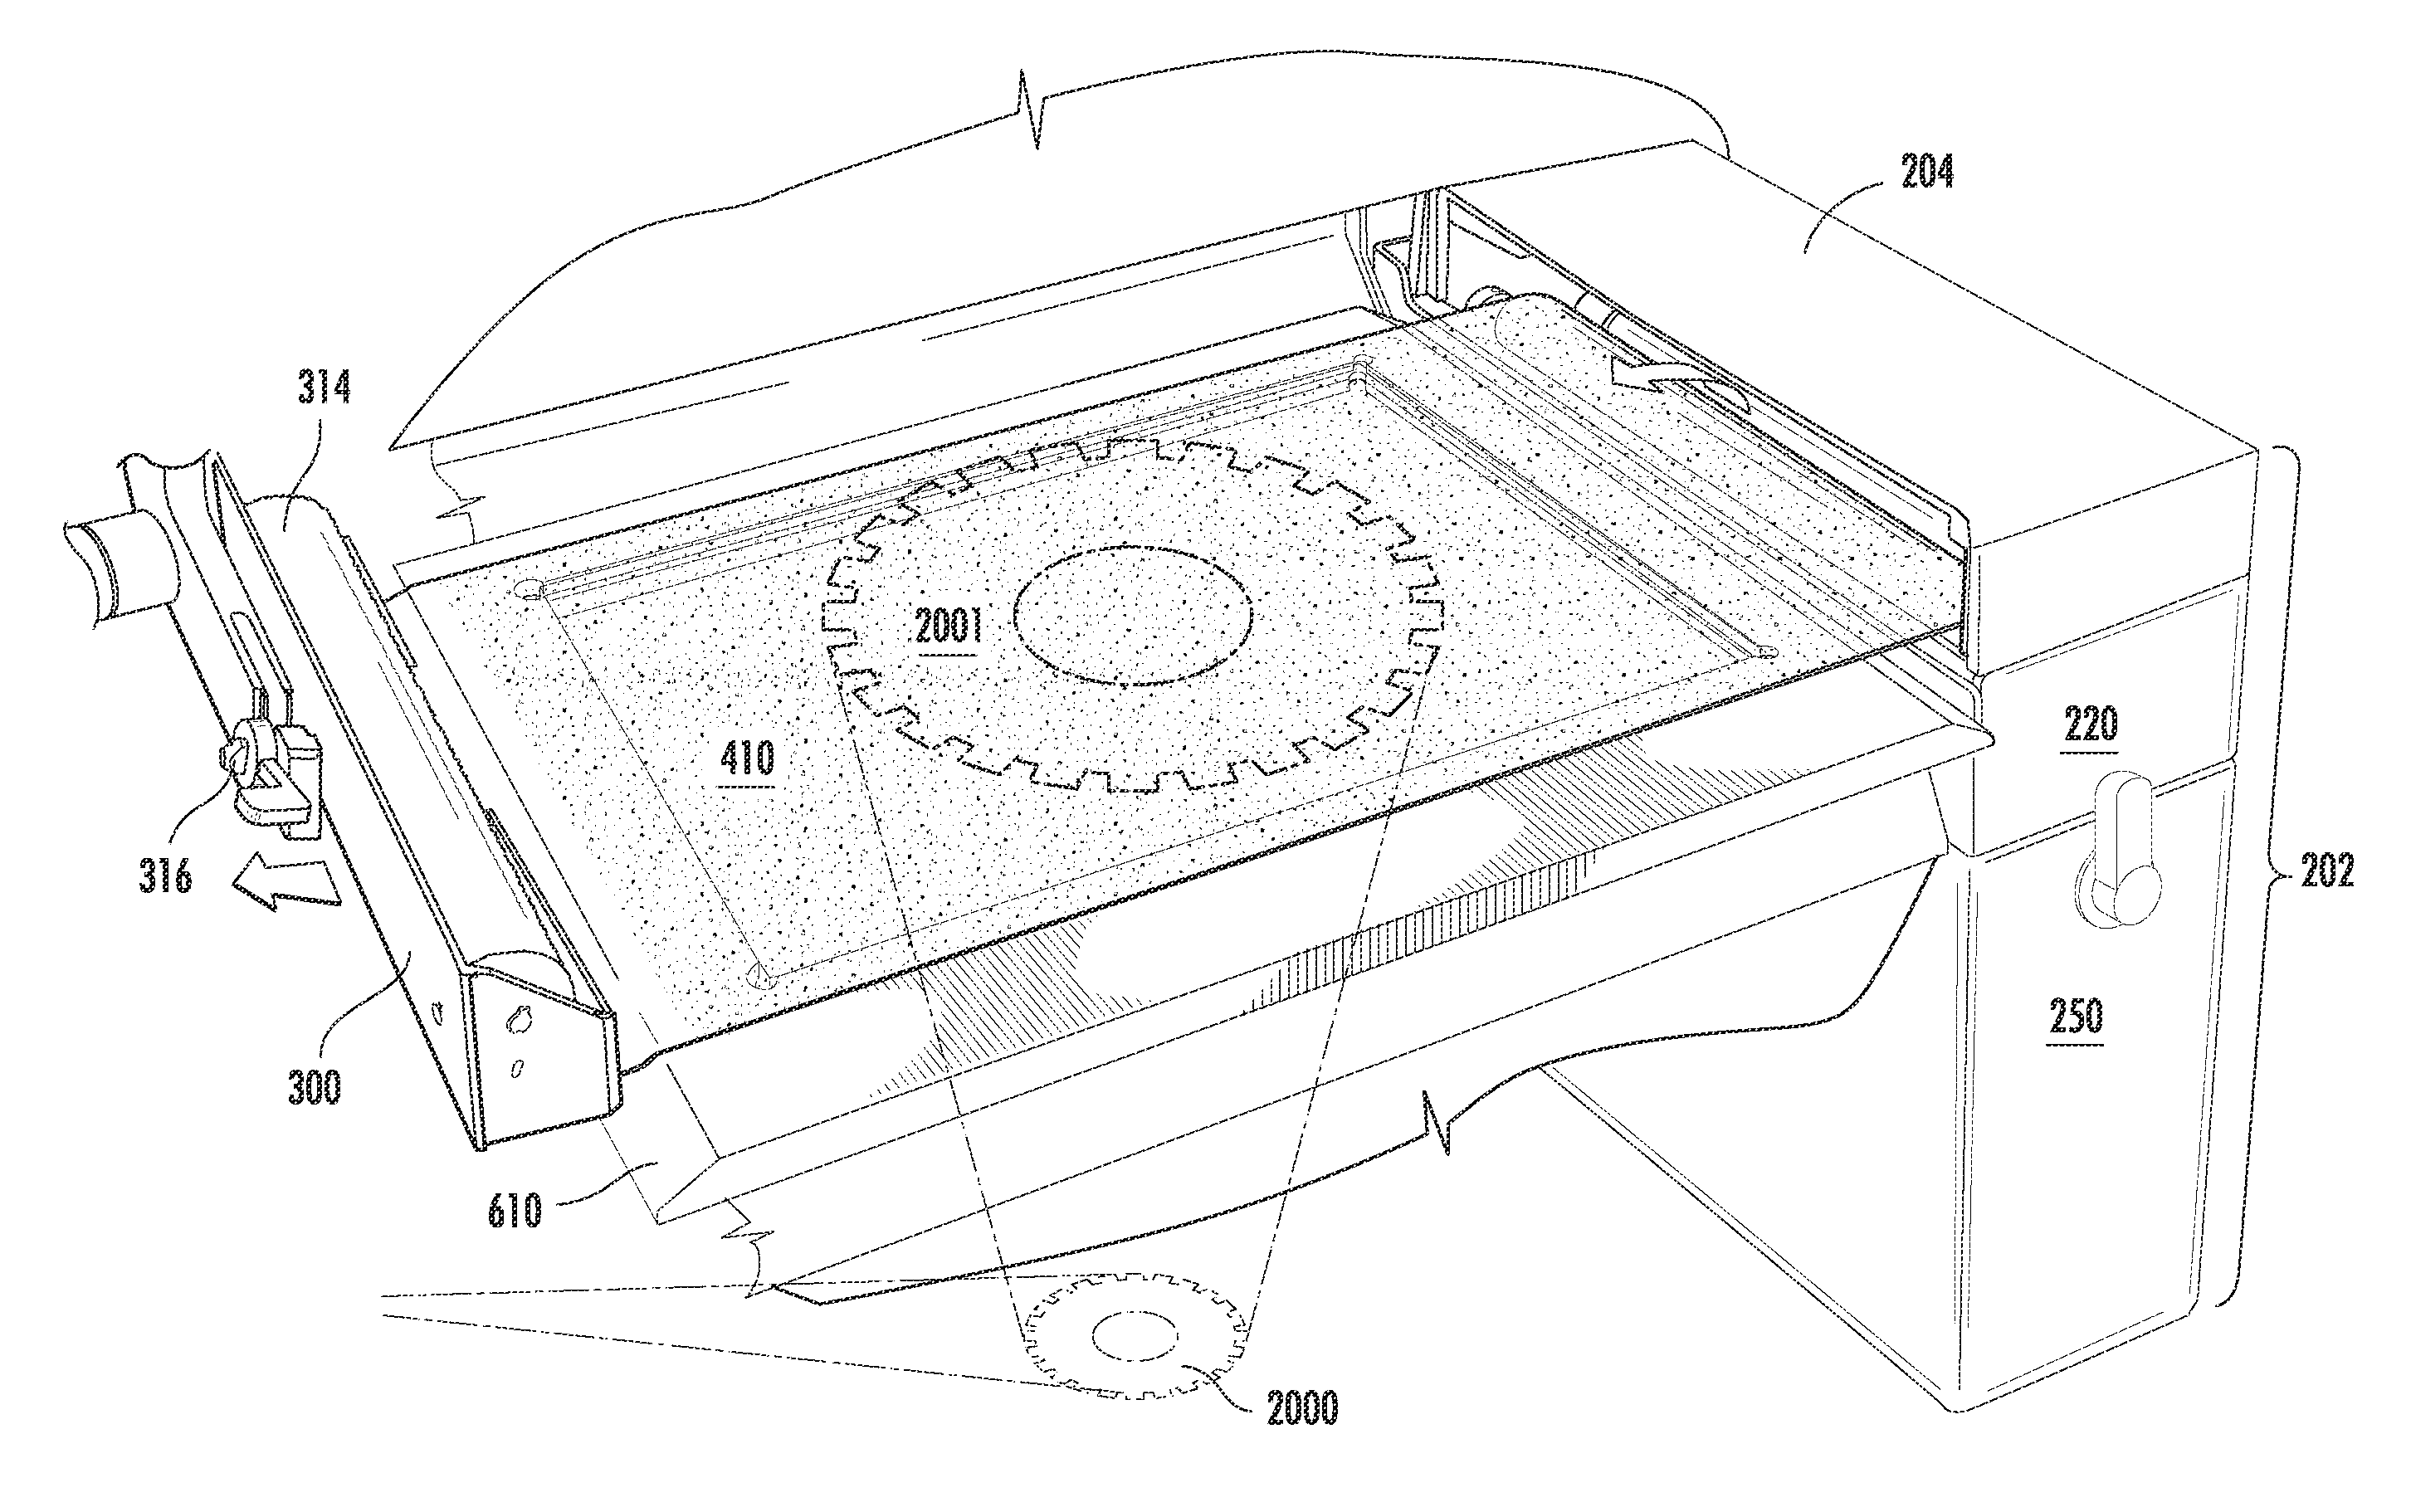 Cartridge for solid imaging apparatus and method